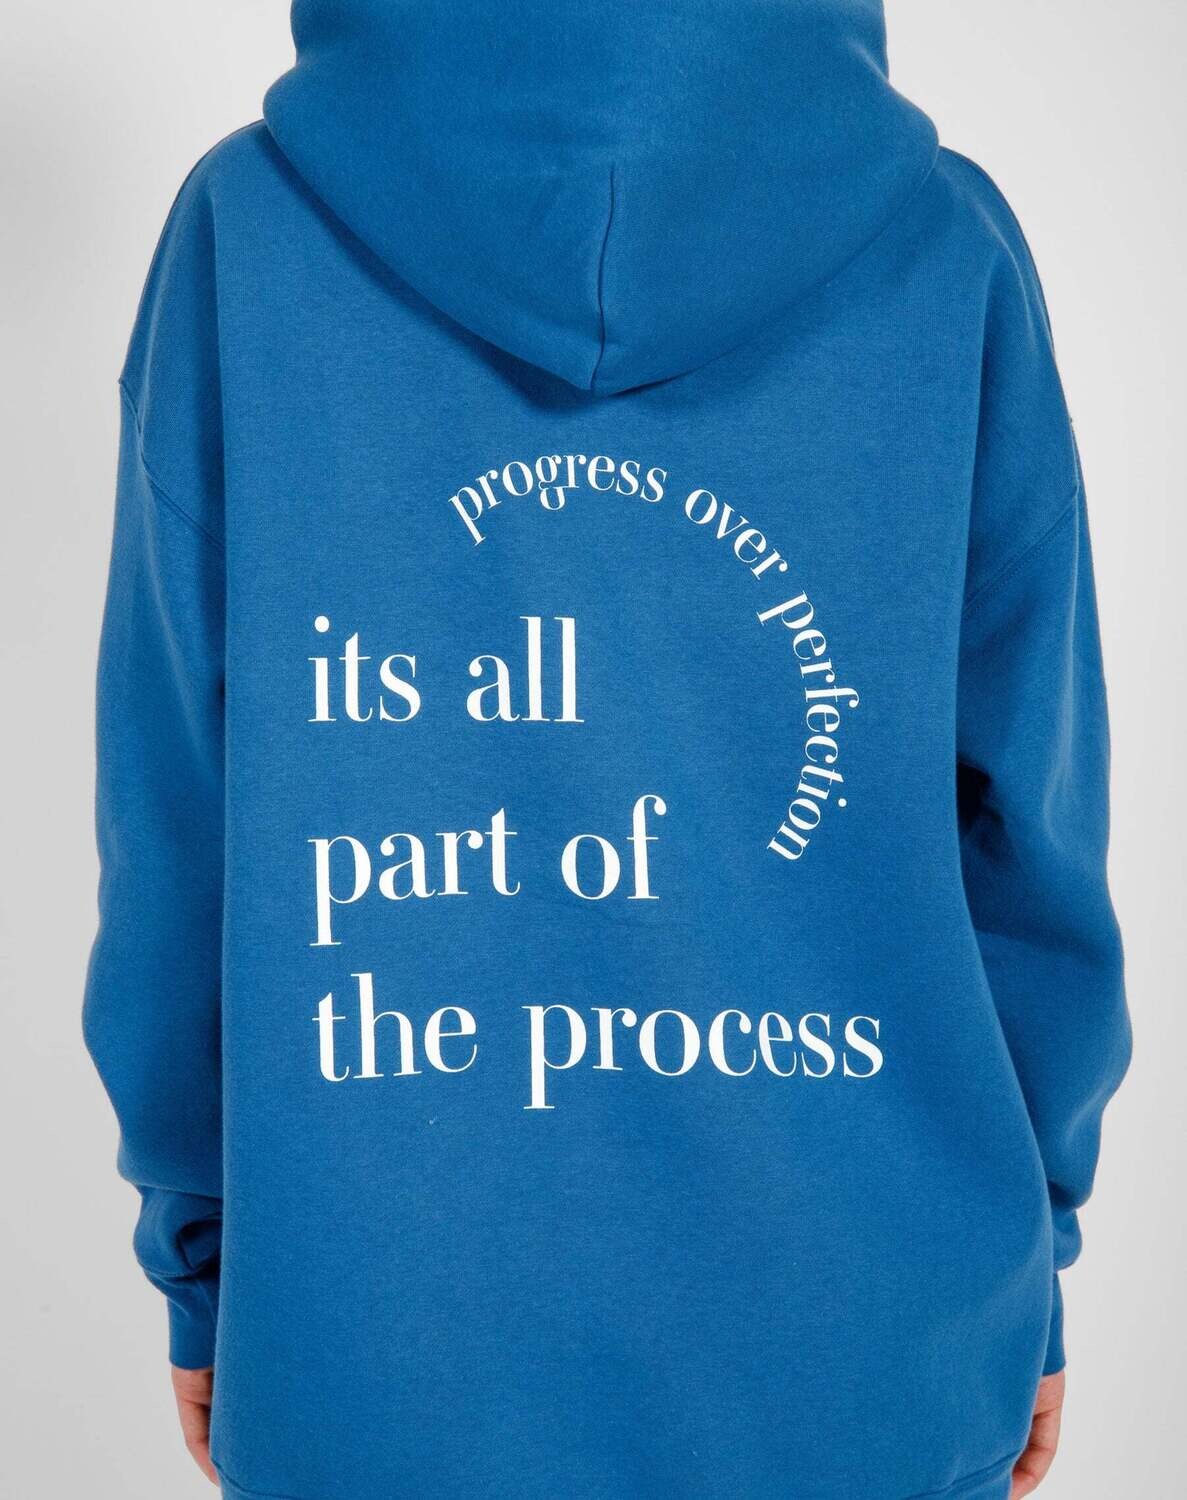 Brunette the Label Perfection Big Sister Hoodie